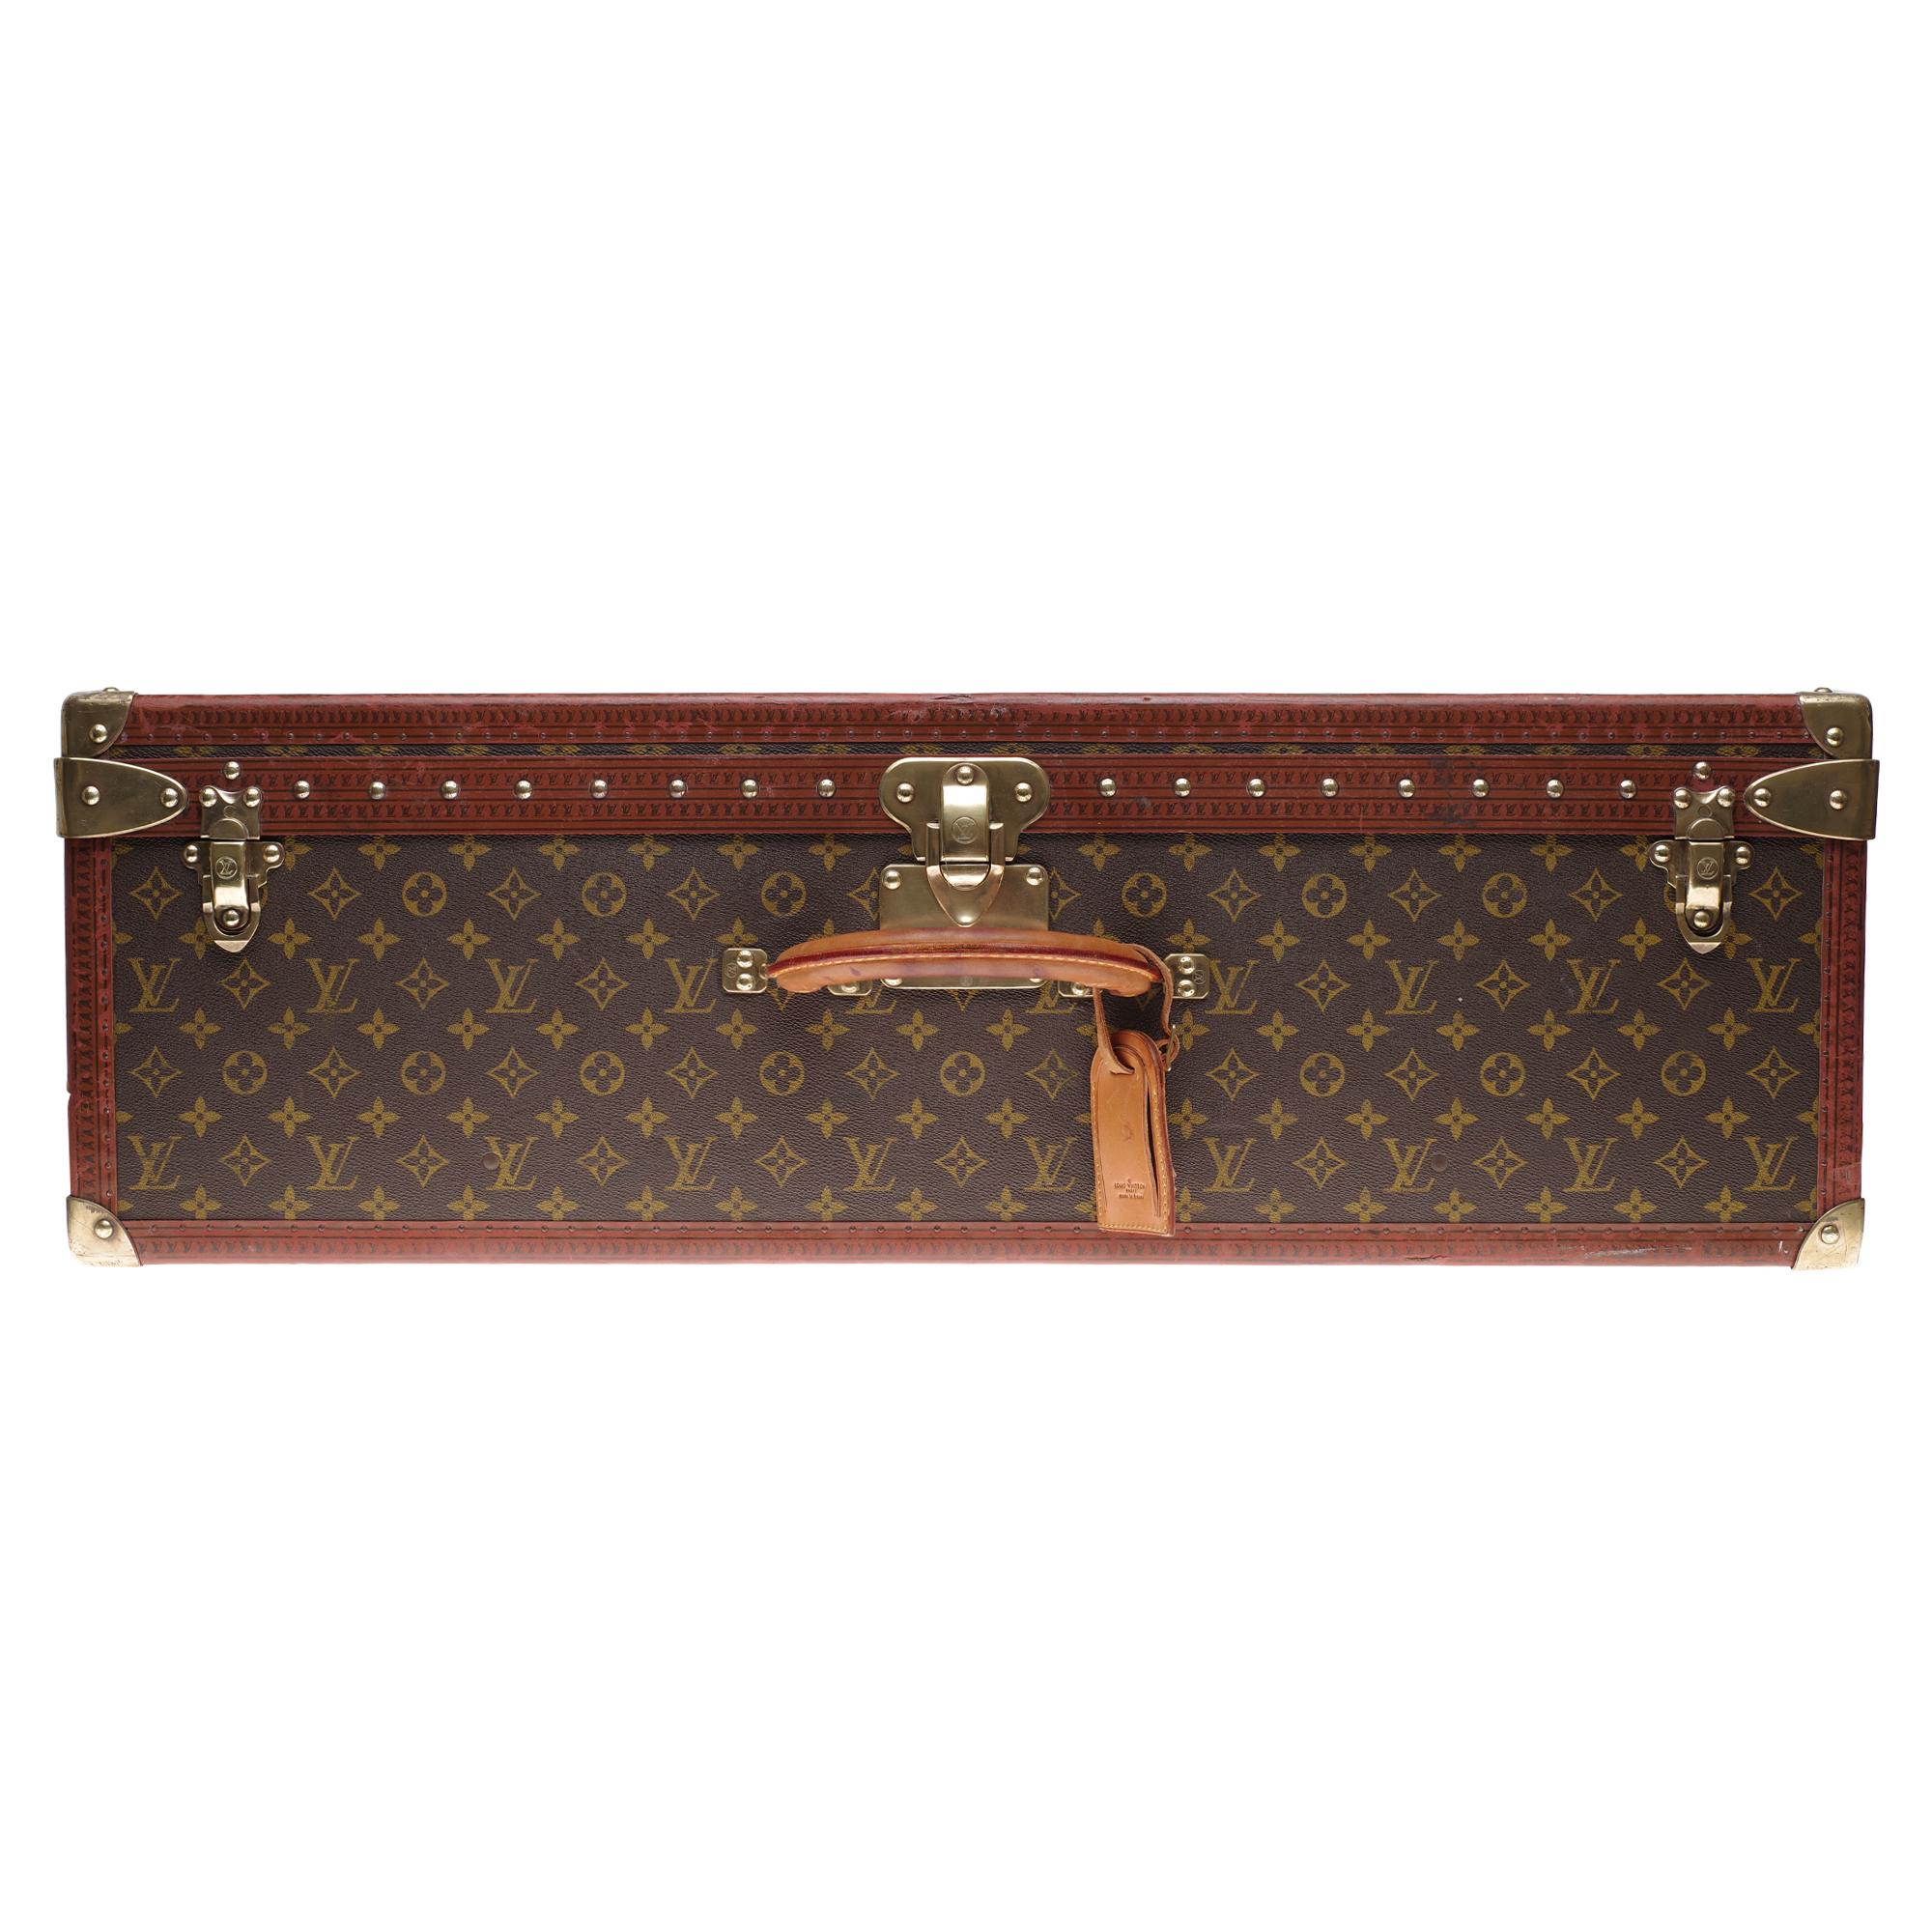 Superb decorative and collector piece: Louis Vuitton 80cm case in monogram canvas, label with serial number, brass trim, natural leather handle for carrying.

Three brass clasps.
Lining in beige canvas, two straps to hold clothes.
Signature: 